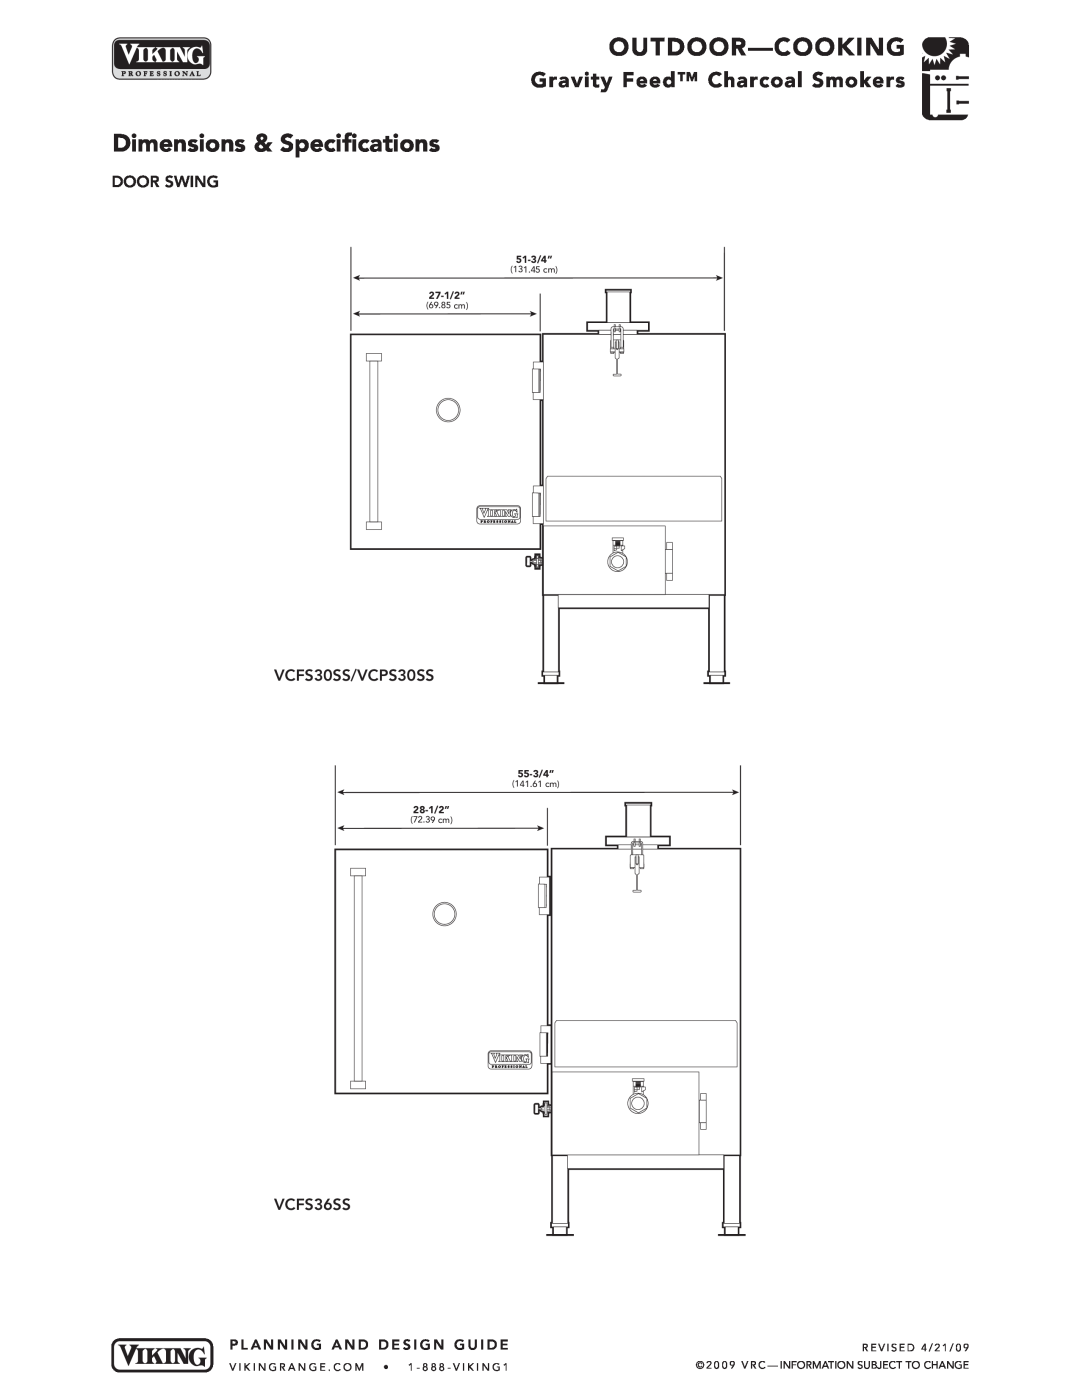 Viking VCFS364SS Outdoor-C Ooking, Dimensions & Specifications, Gravity Feed Charco al Smoker s, Planning, Design, Guide 